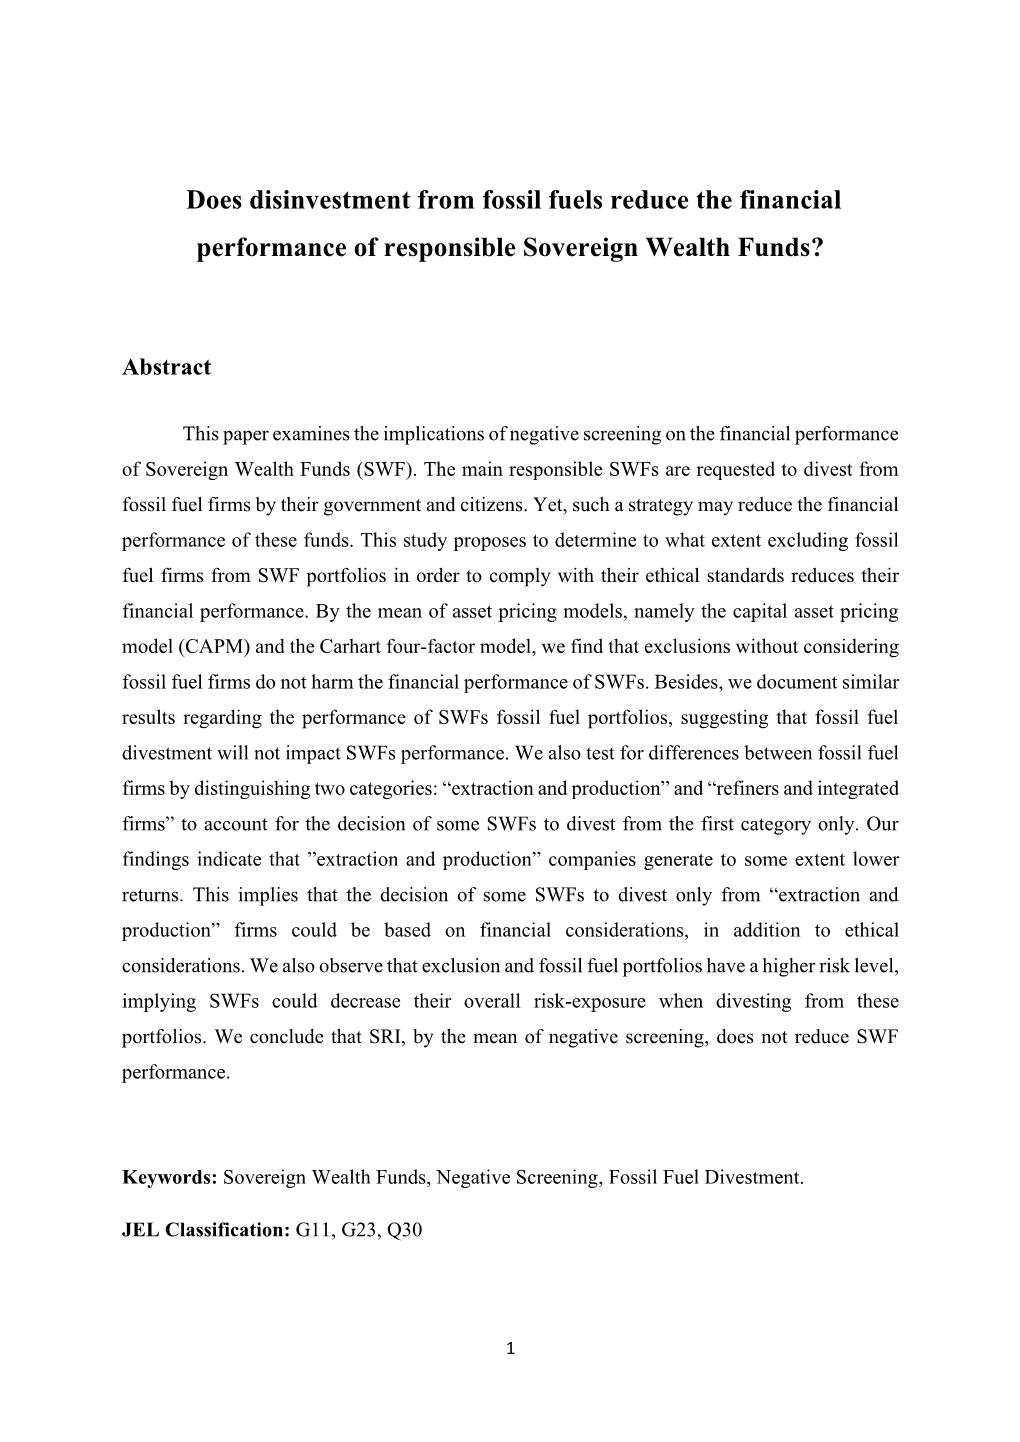 Does Disinvestment from Fossil Fuels Reduce the Financial Performance of Responsible Sovereign Wealth Funds?